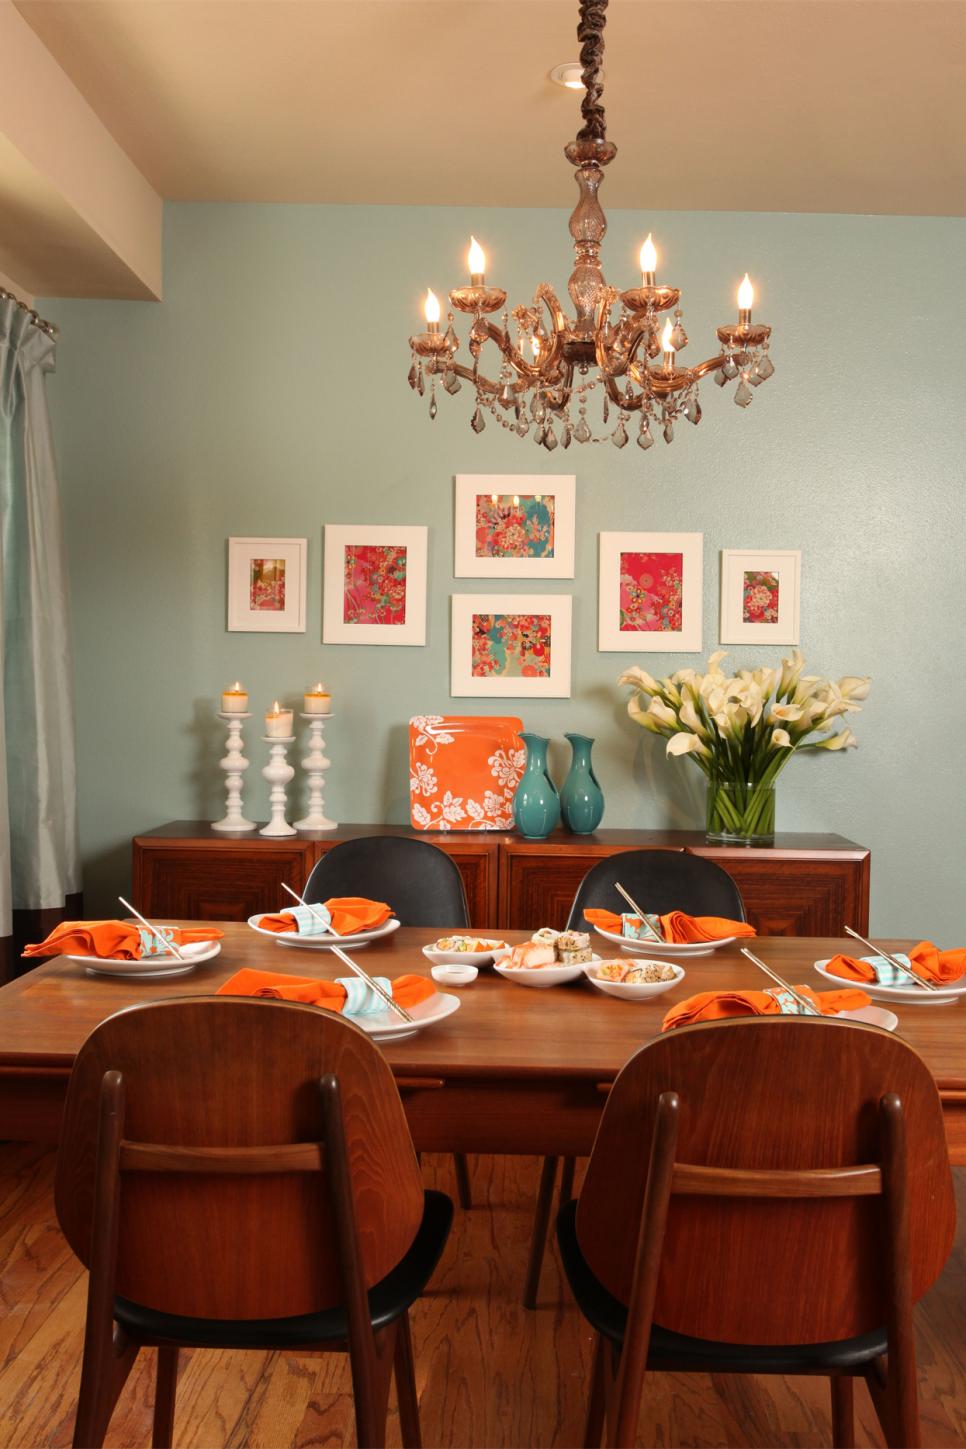 Cool Blue Transitional Dining Room Features Sparkling Chandelier ...